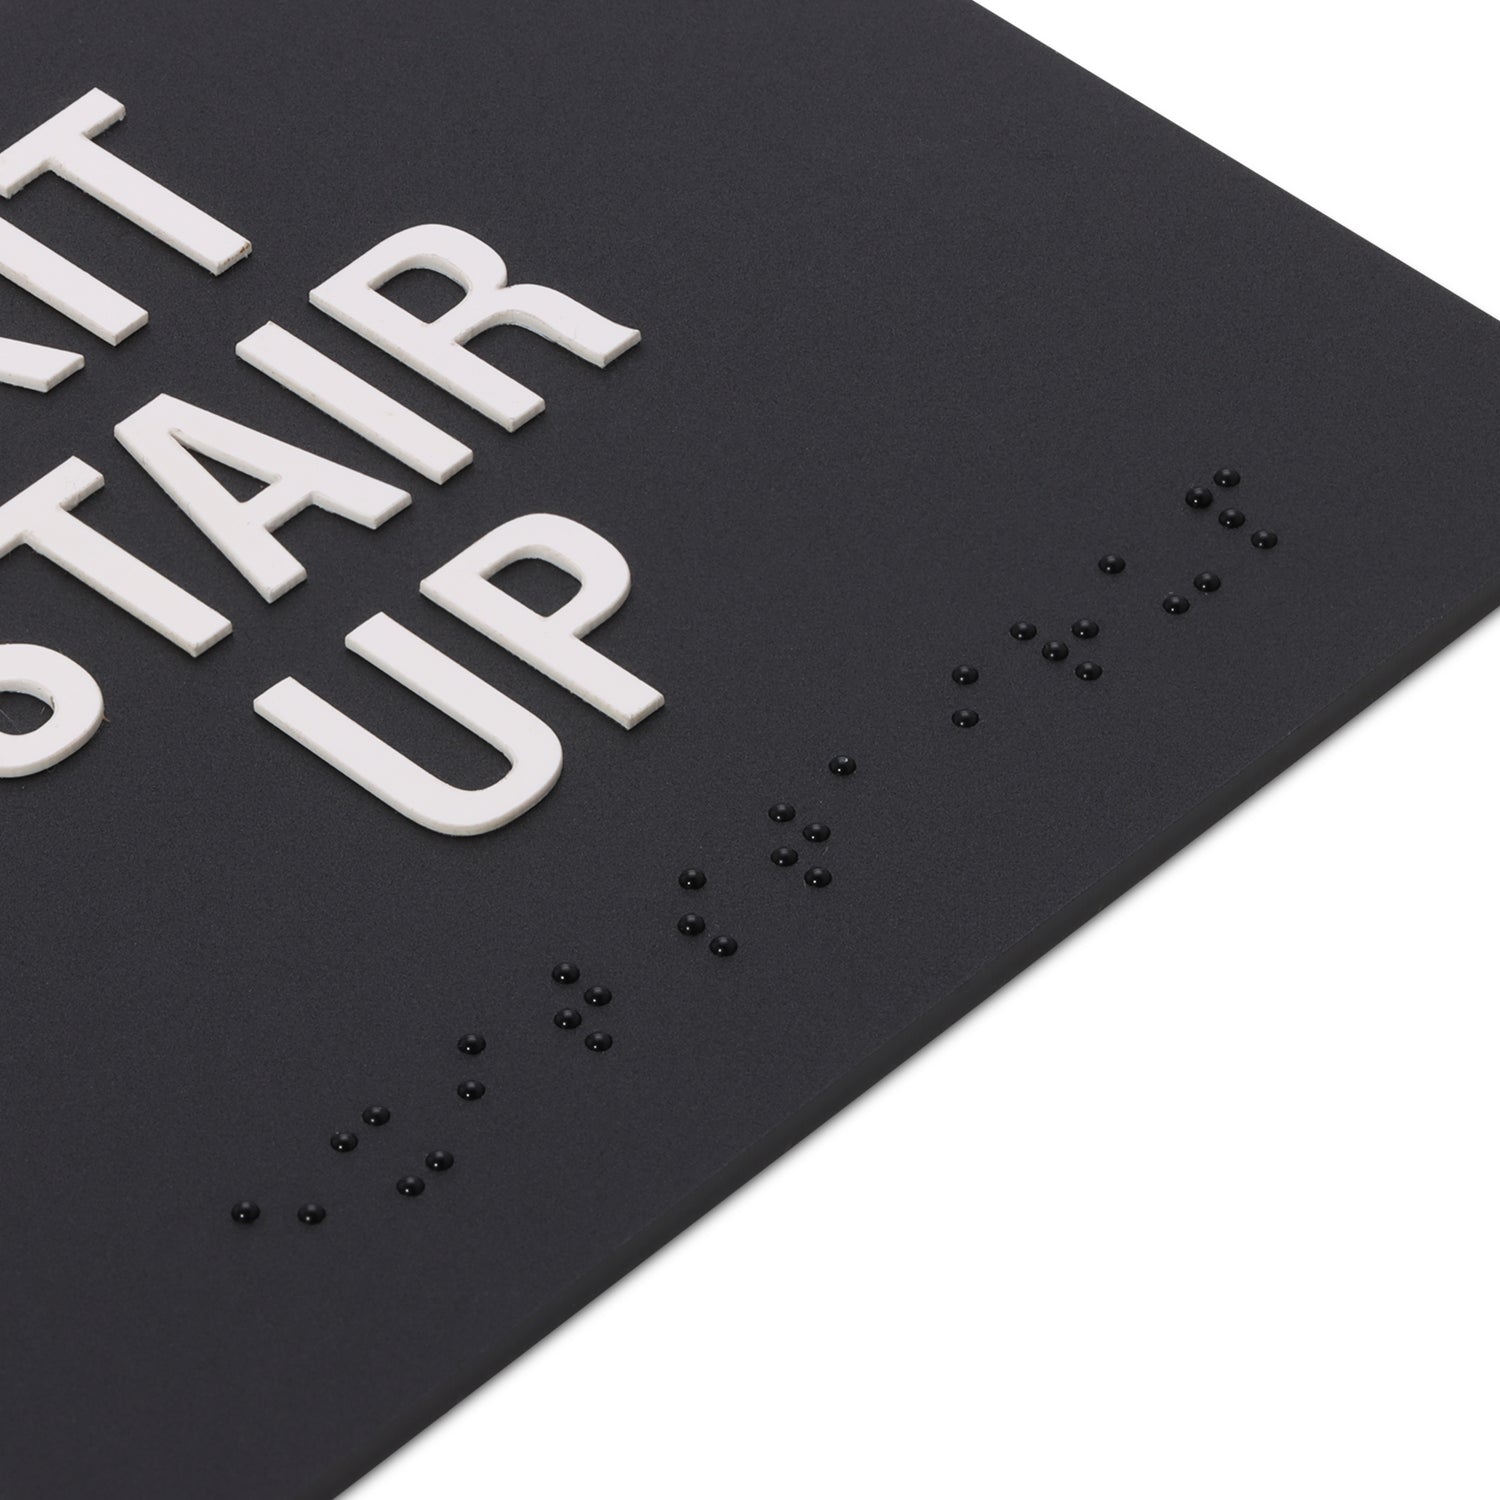 Exit Stair Up Braille Signage